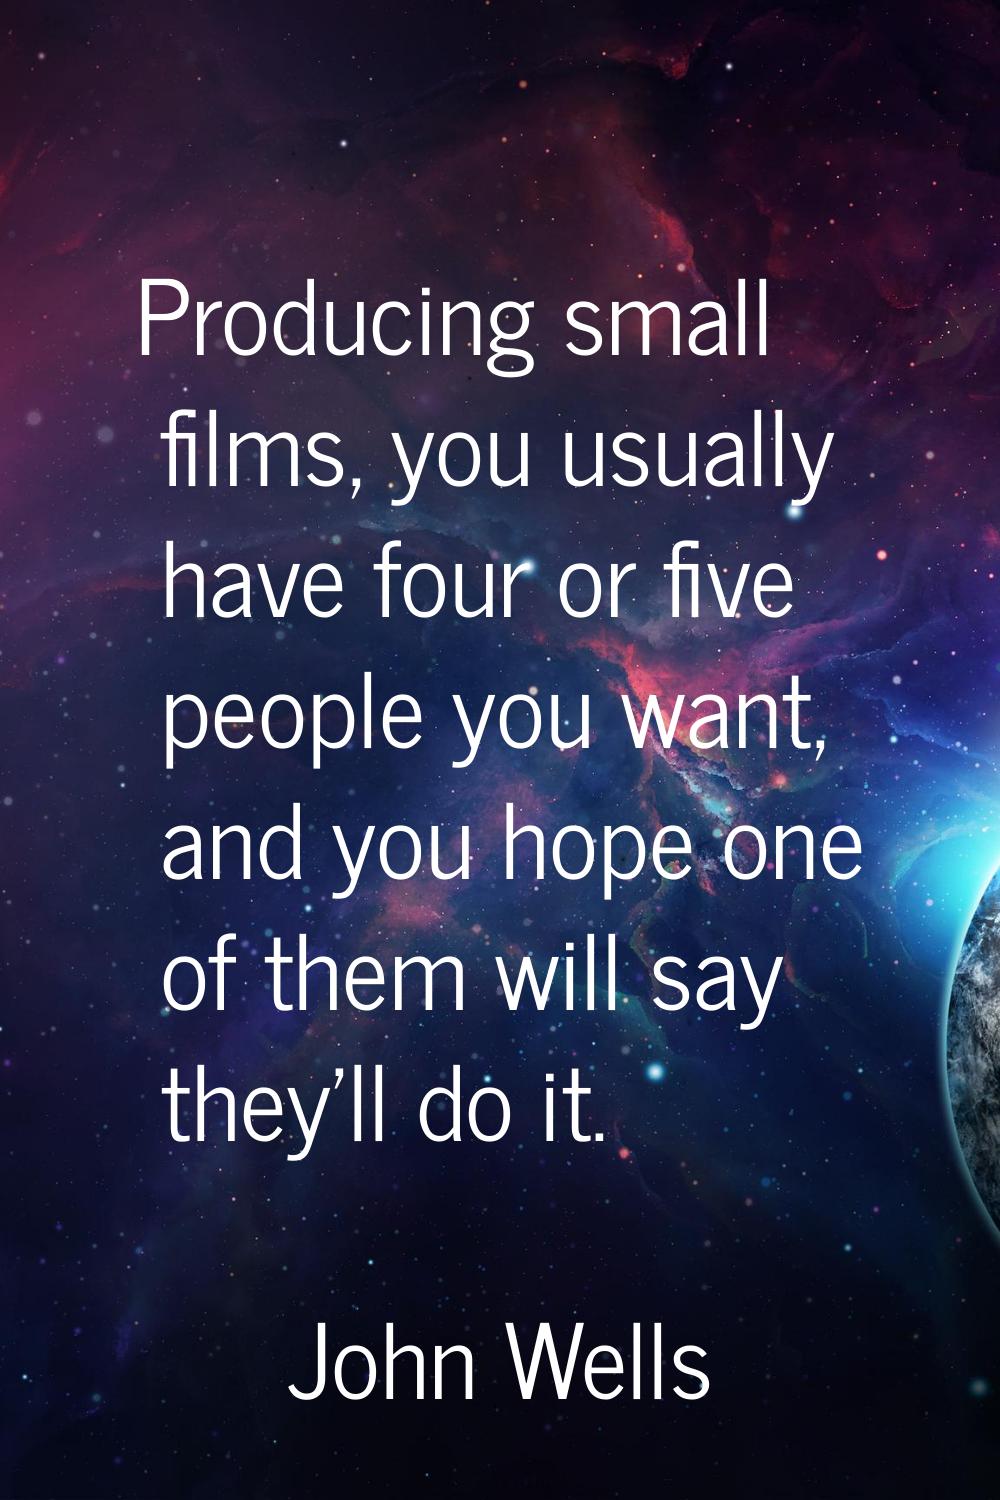 Producing small films, you usually have four or five people you want, and you hope one of them will